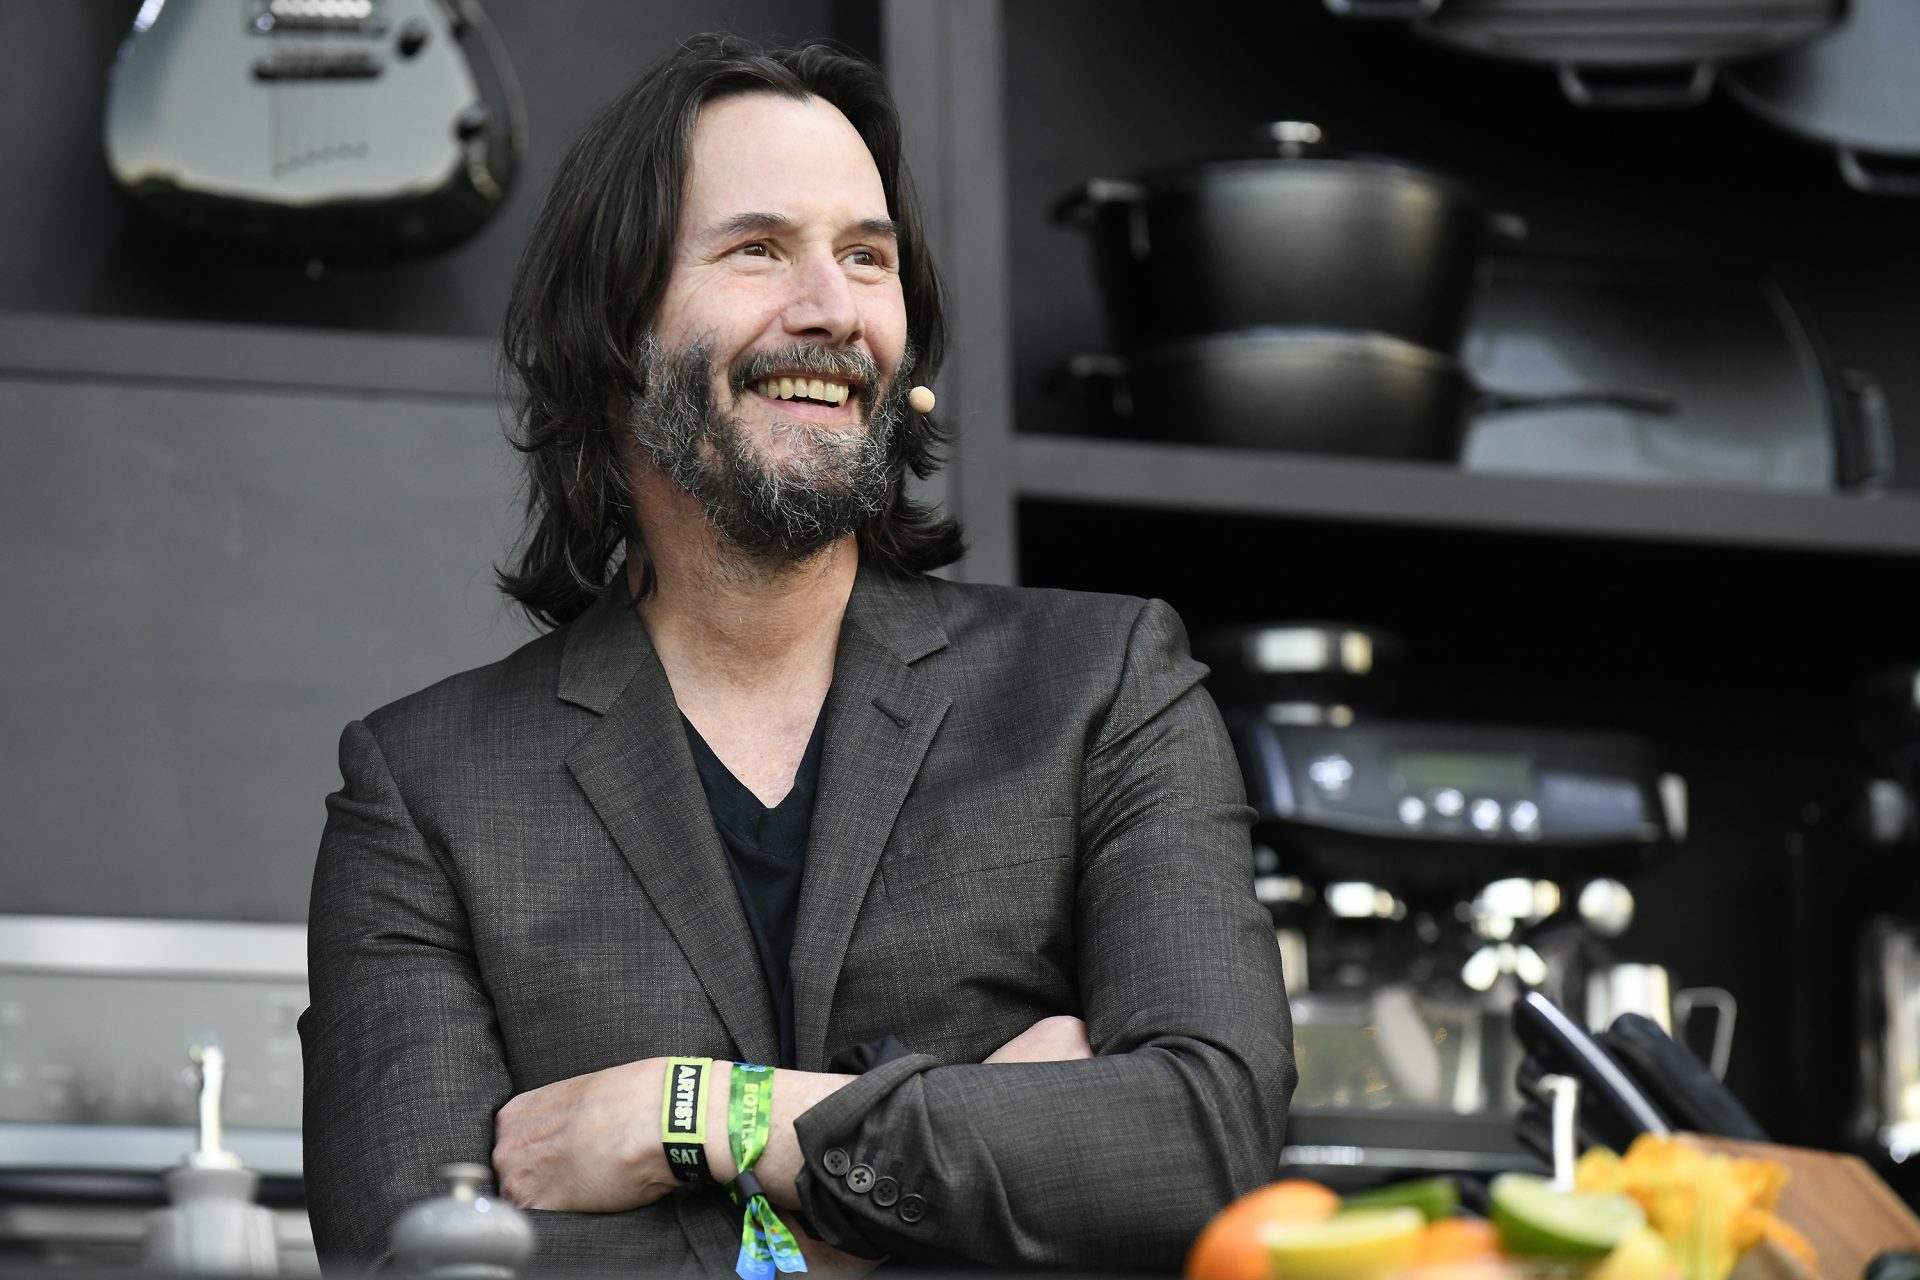 To Keanu Reeves, money is not important